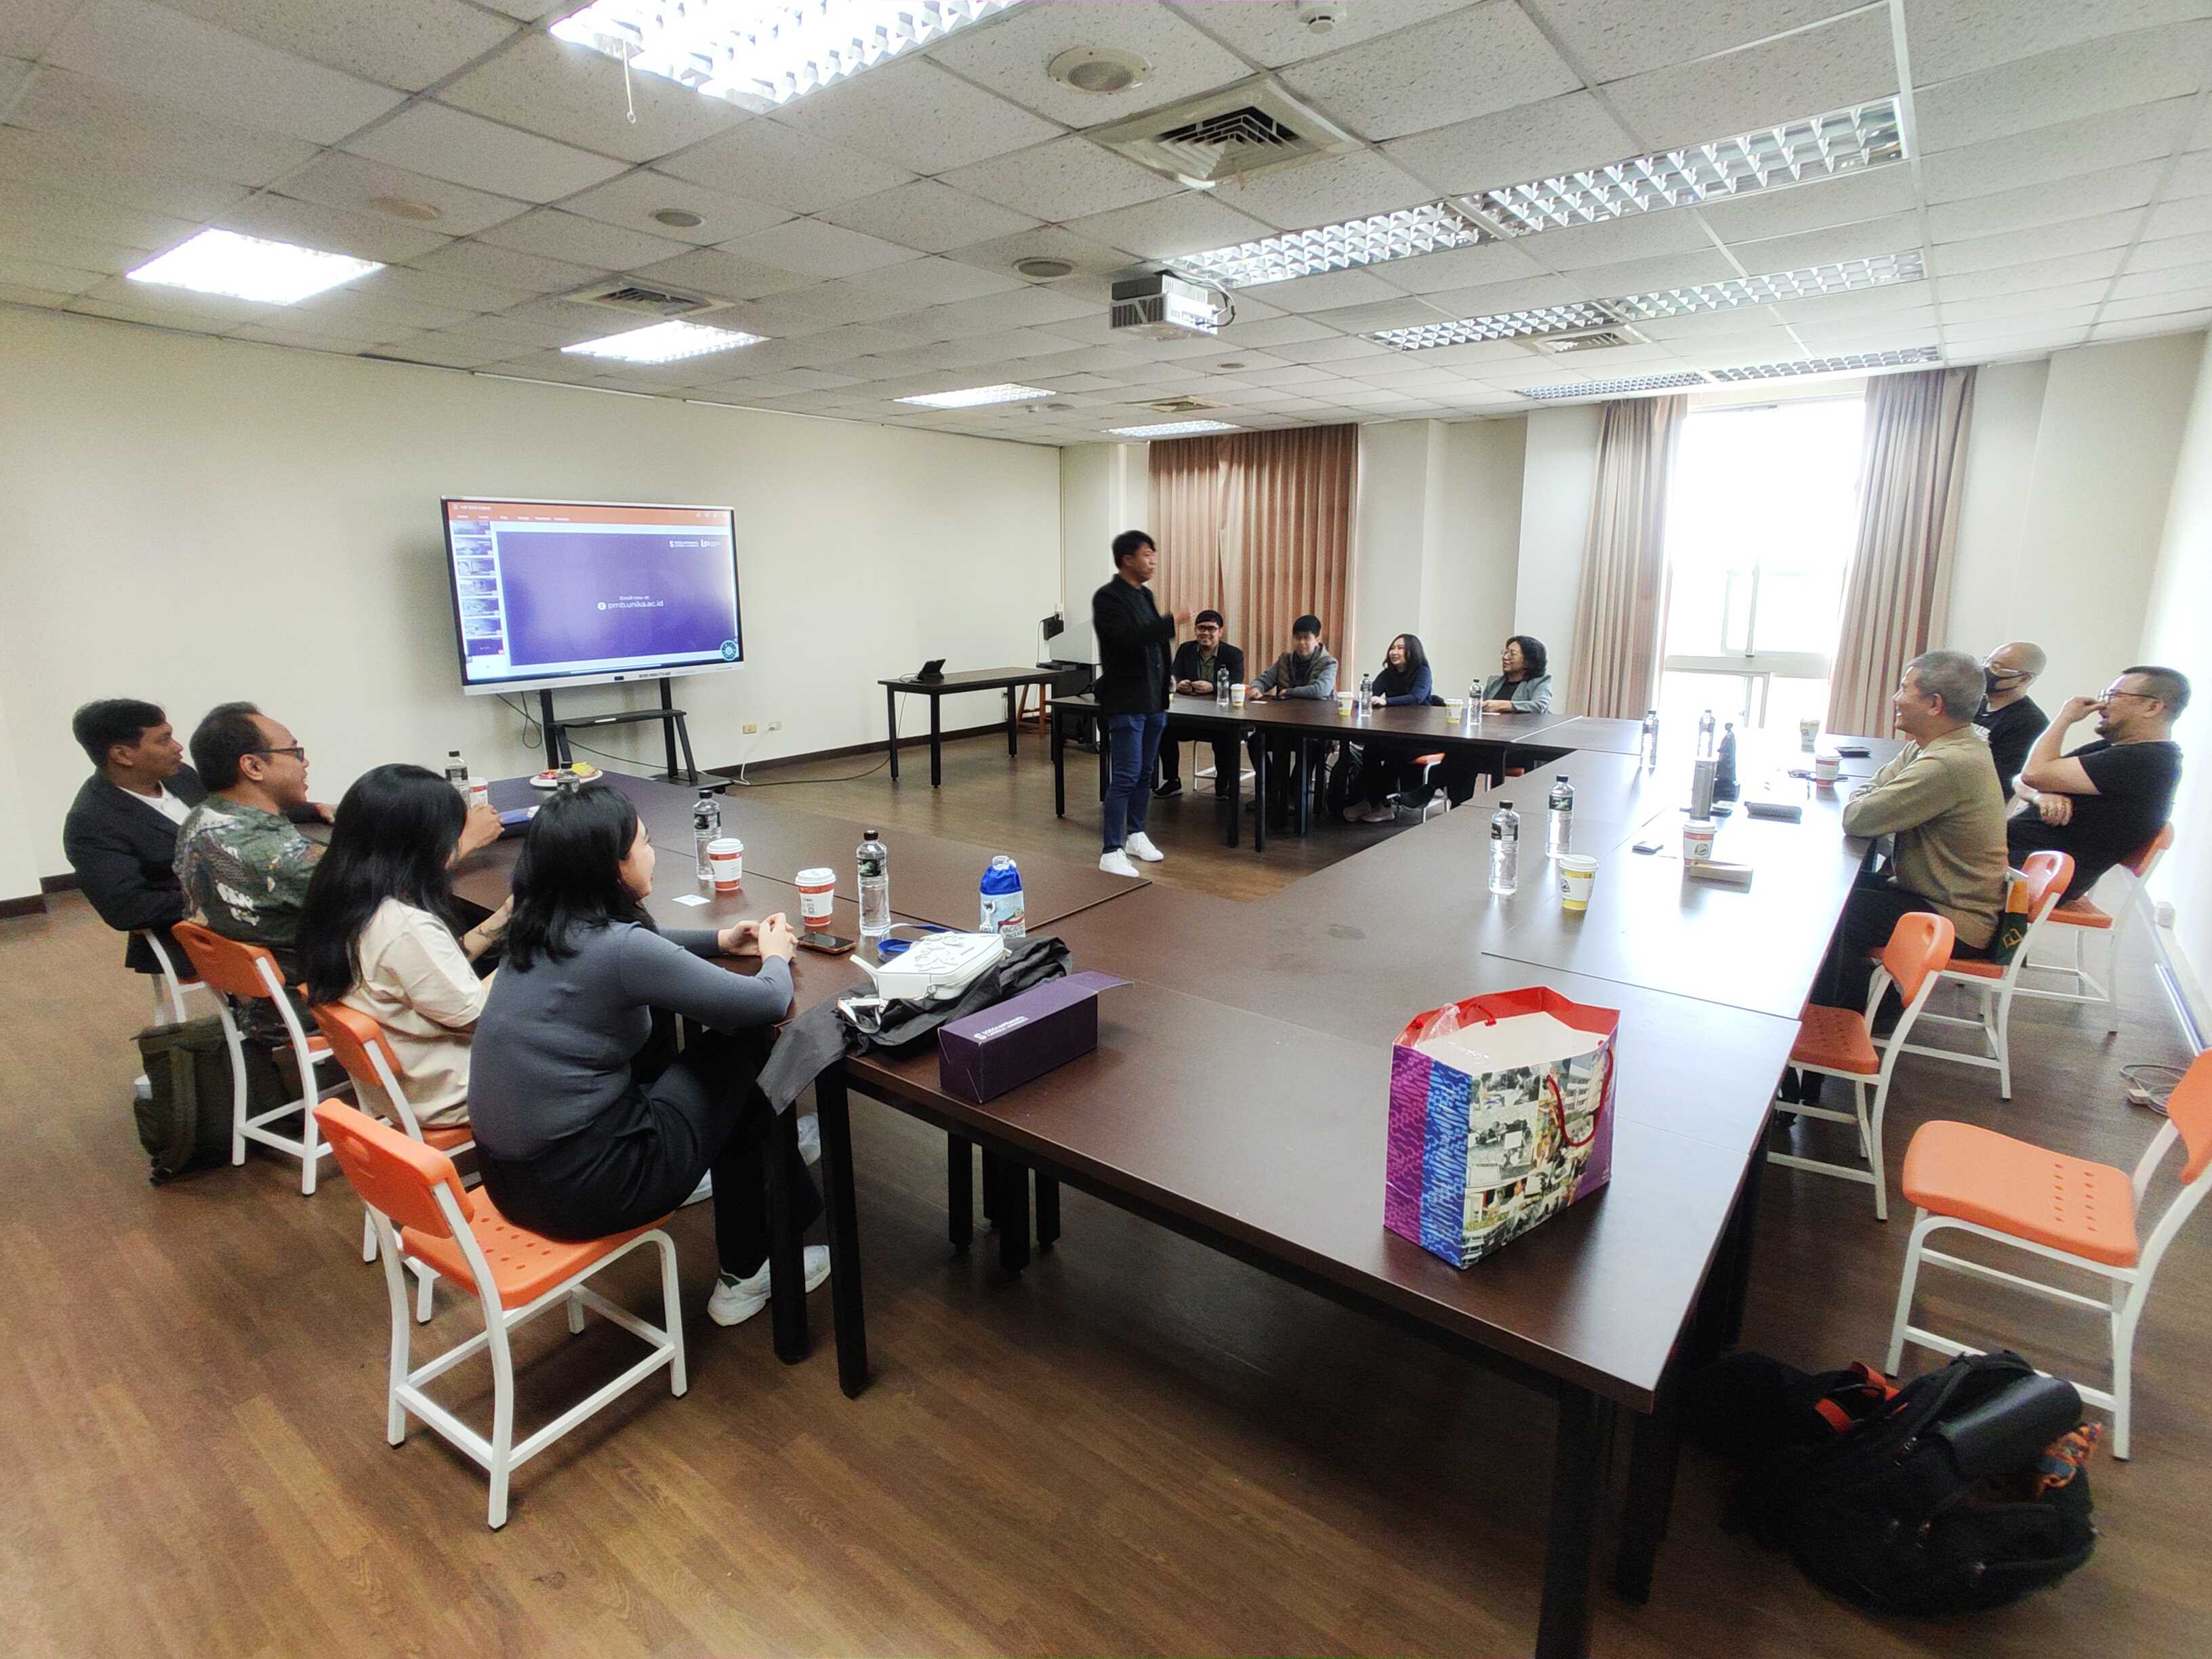 The visiting delegation from Soegijapranata Catholic University in Indonesia engaging in in-depth academic exchanges with faculty members of Asia University's Design College